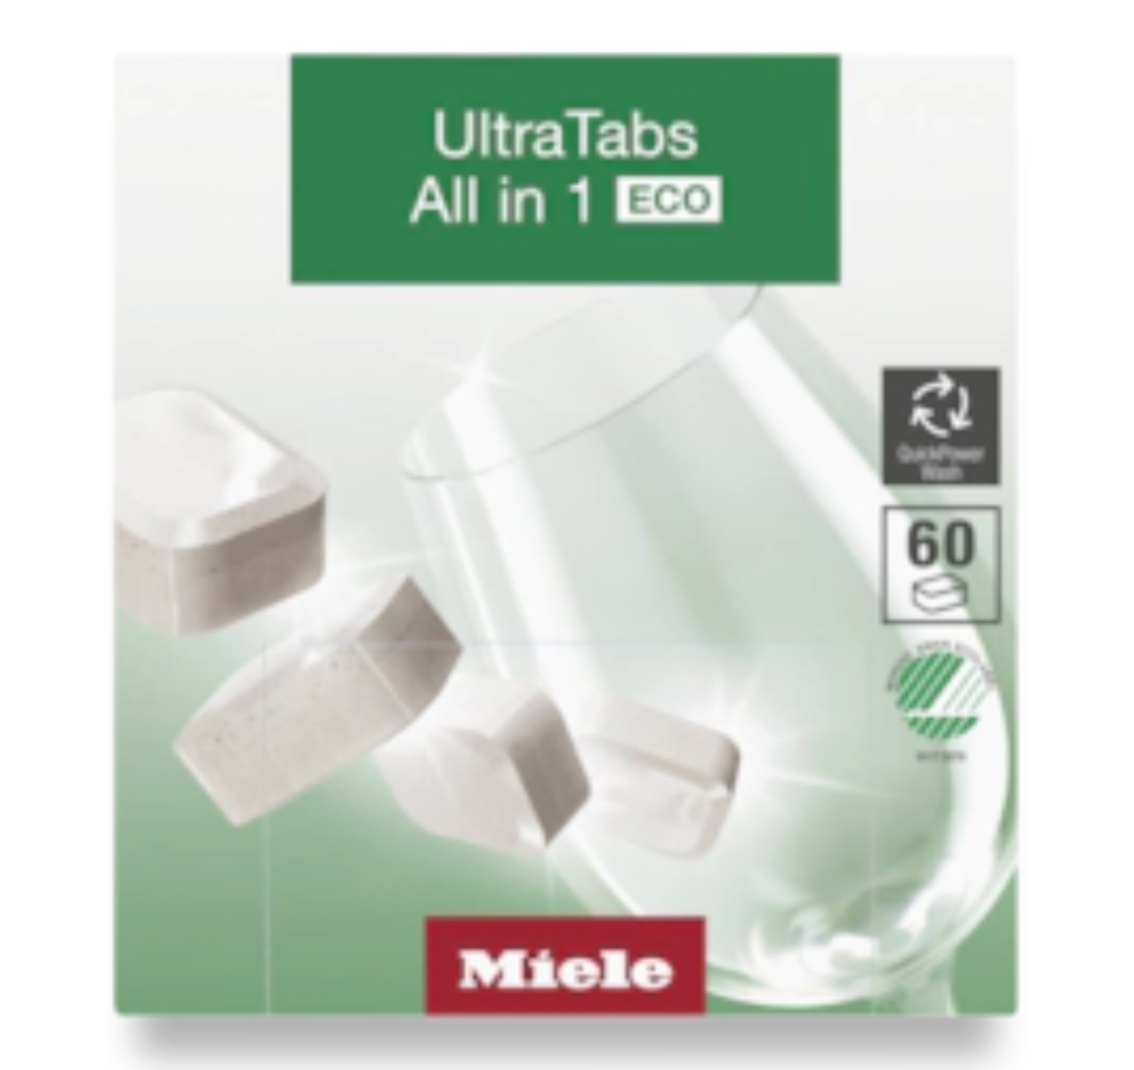 Miele UltraTabs All in 1 ECO Detergent Pods for Dishwasher – 60 tabs